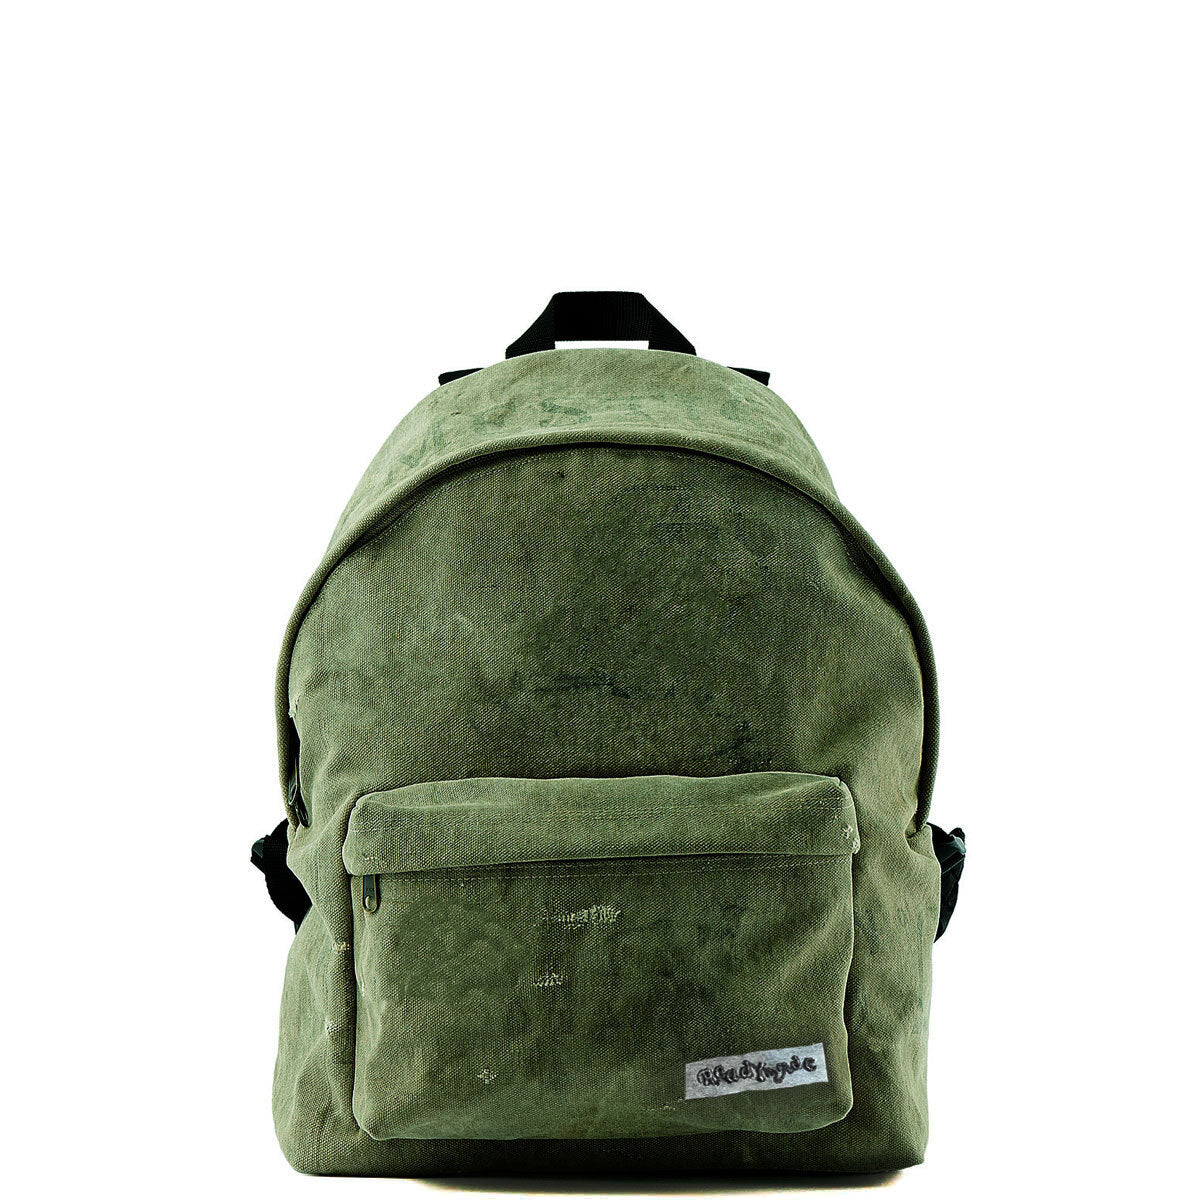 BACK PACK - Why are you here?